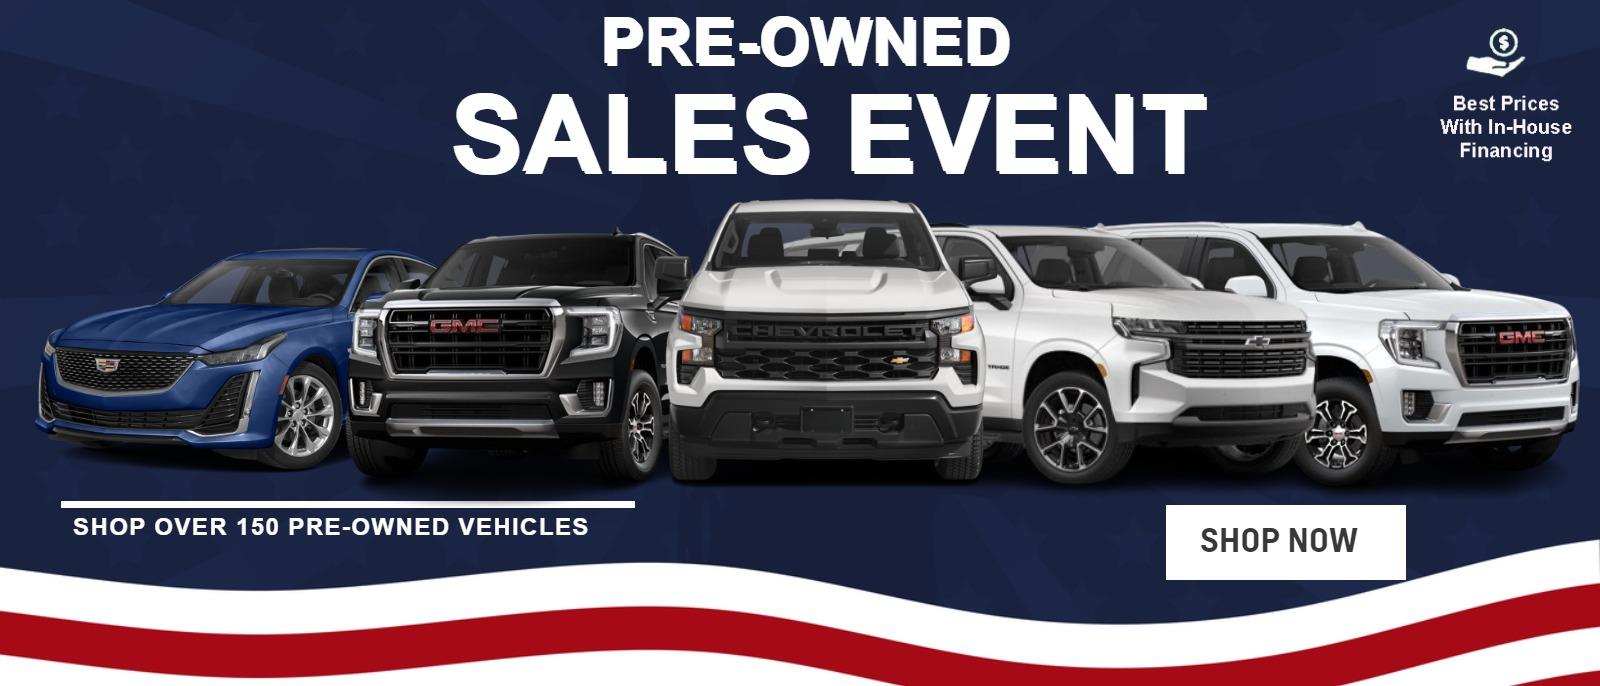 Over 140 Vehicles Available
Best Prices With In-House Financing!